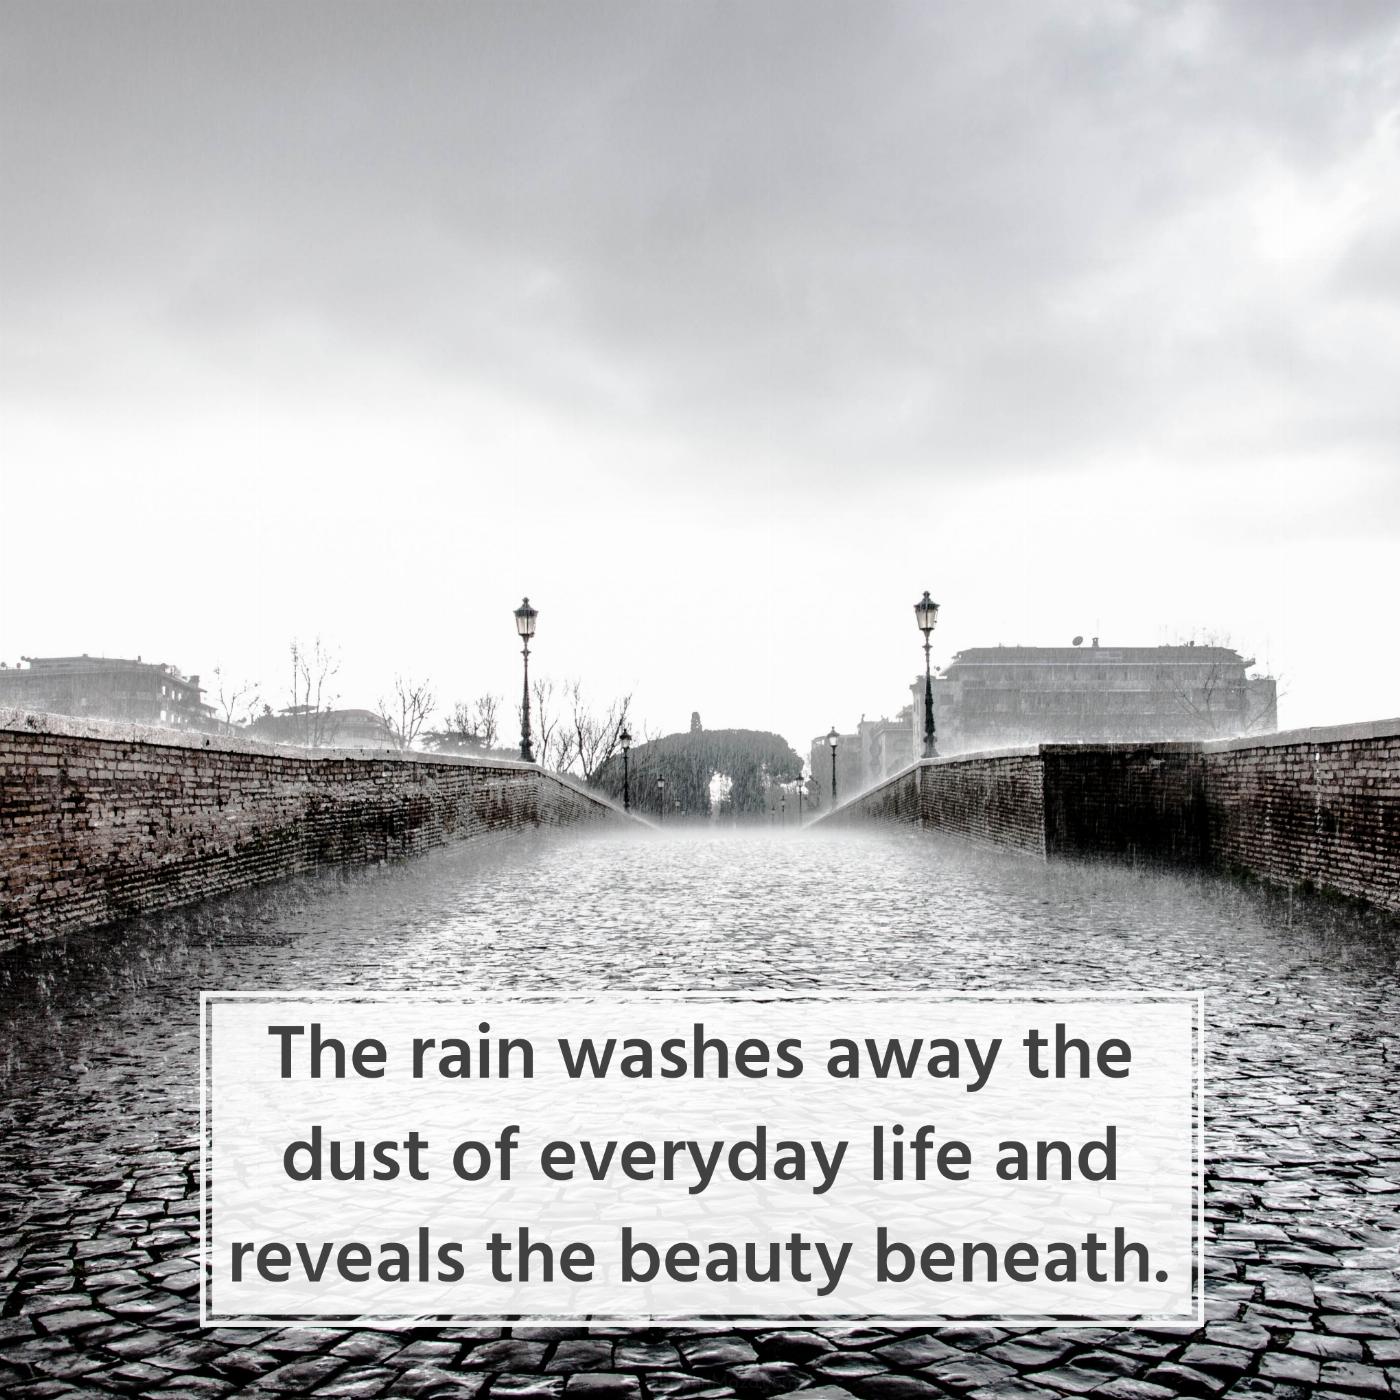 The rain washes away the dust of everyday life